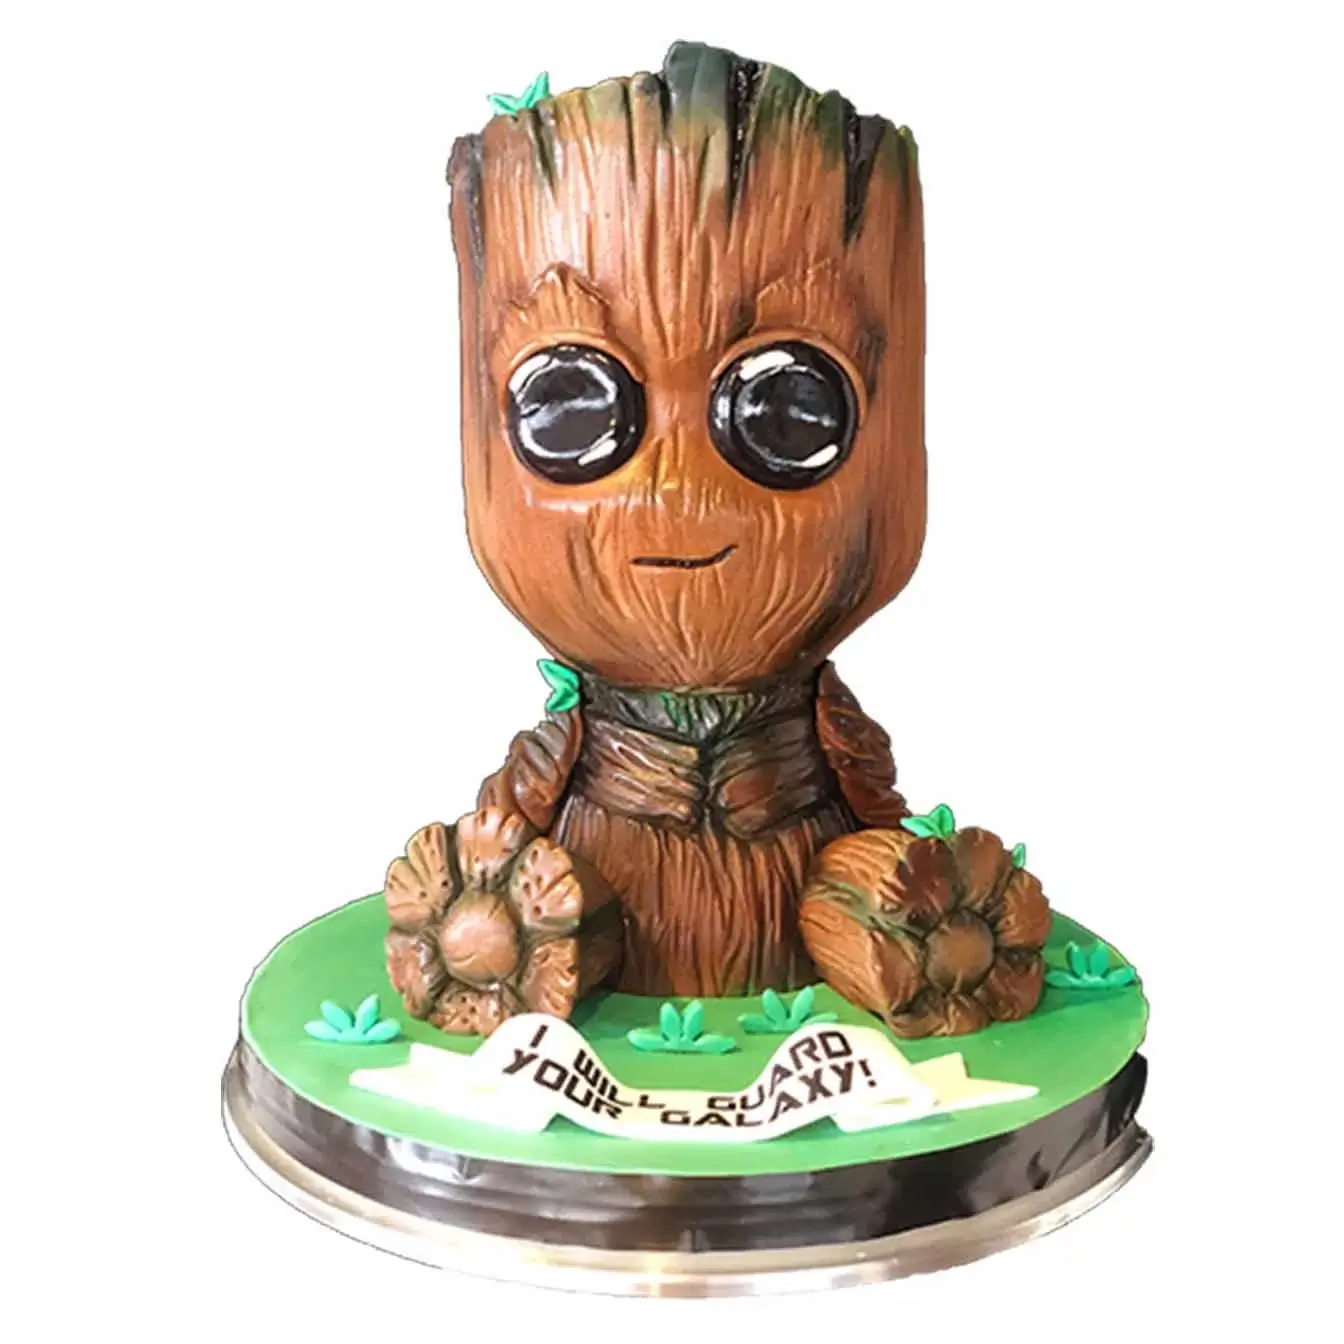 3D Groot Cake - Guardians of the Galaxy-inspired edible masterpiece